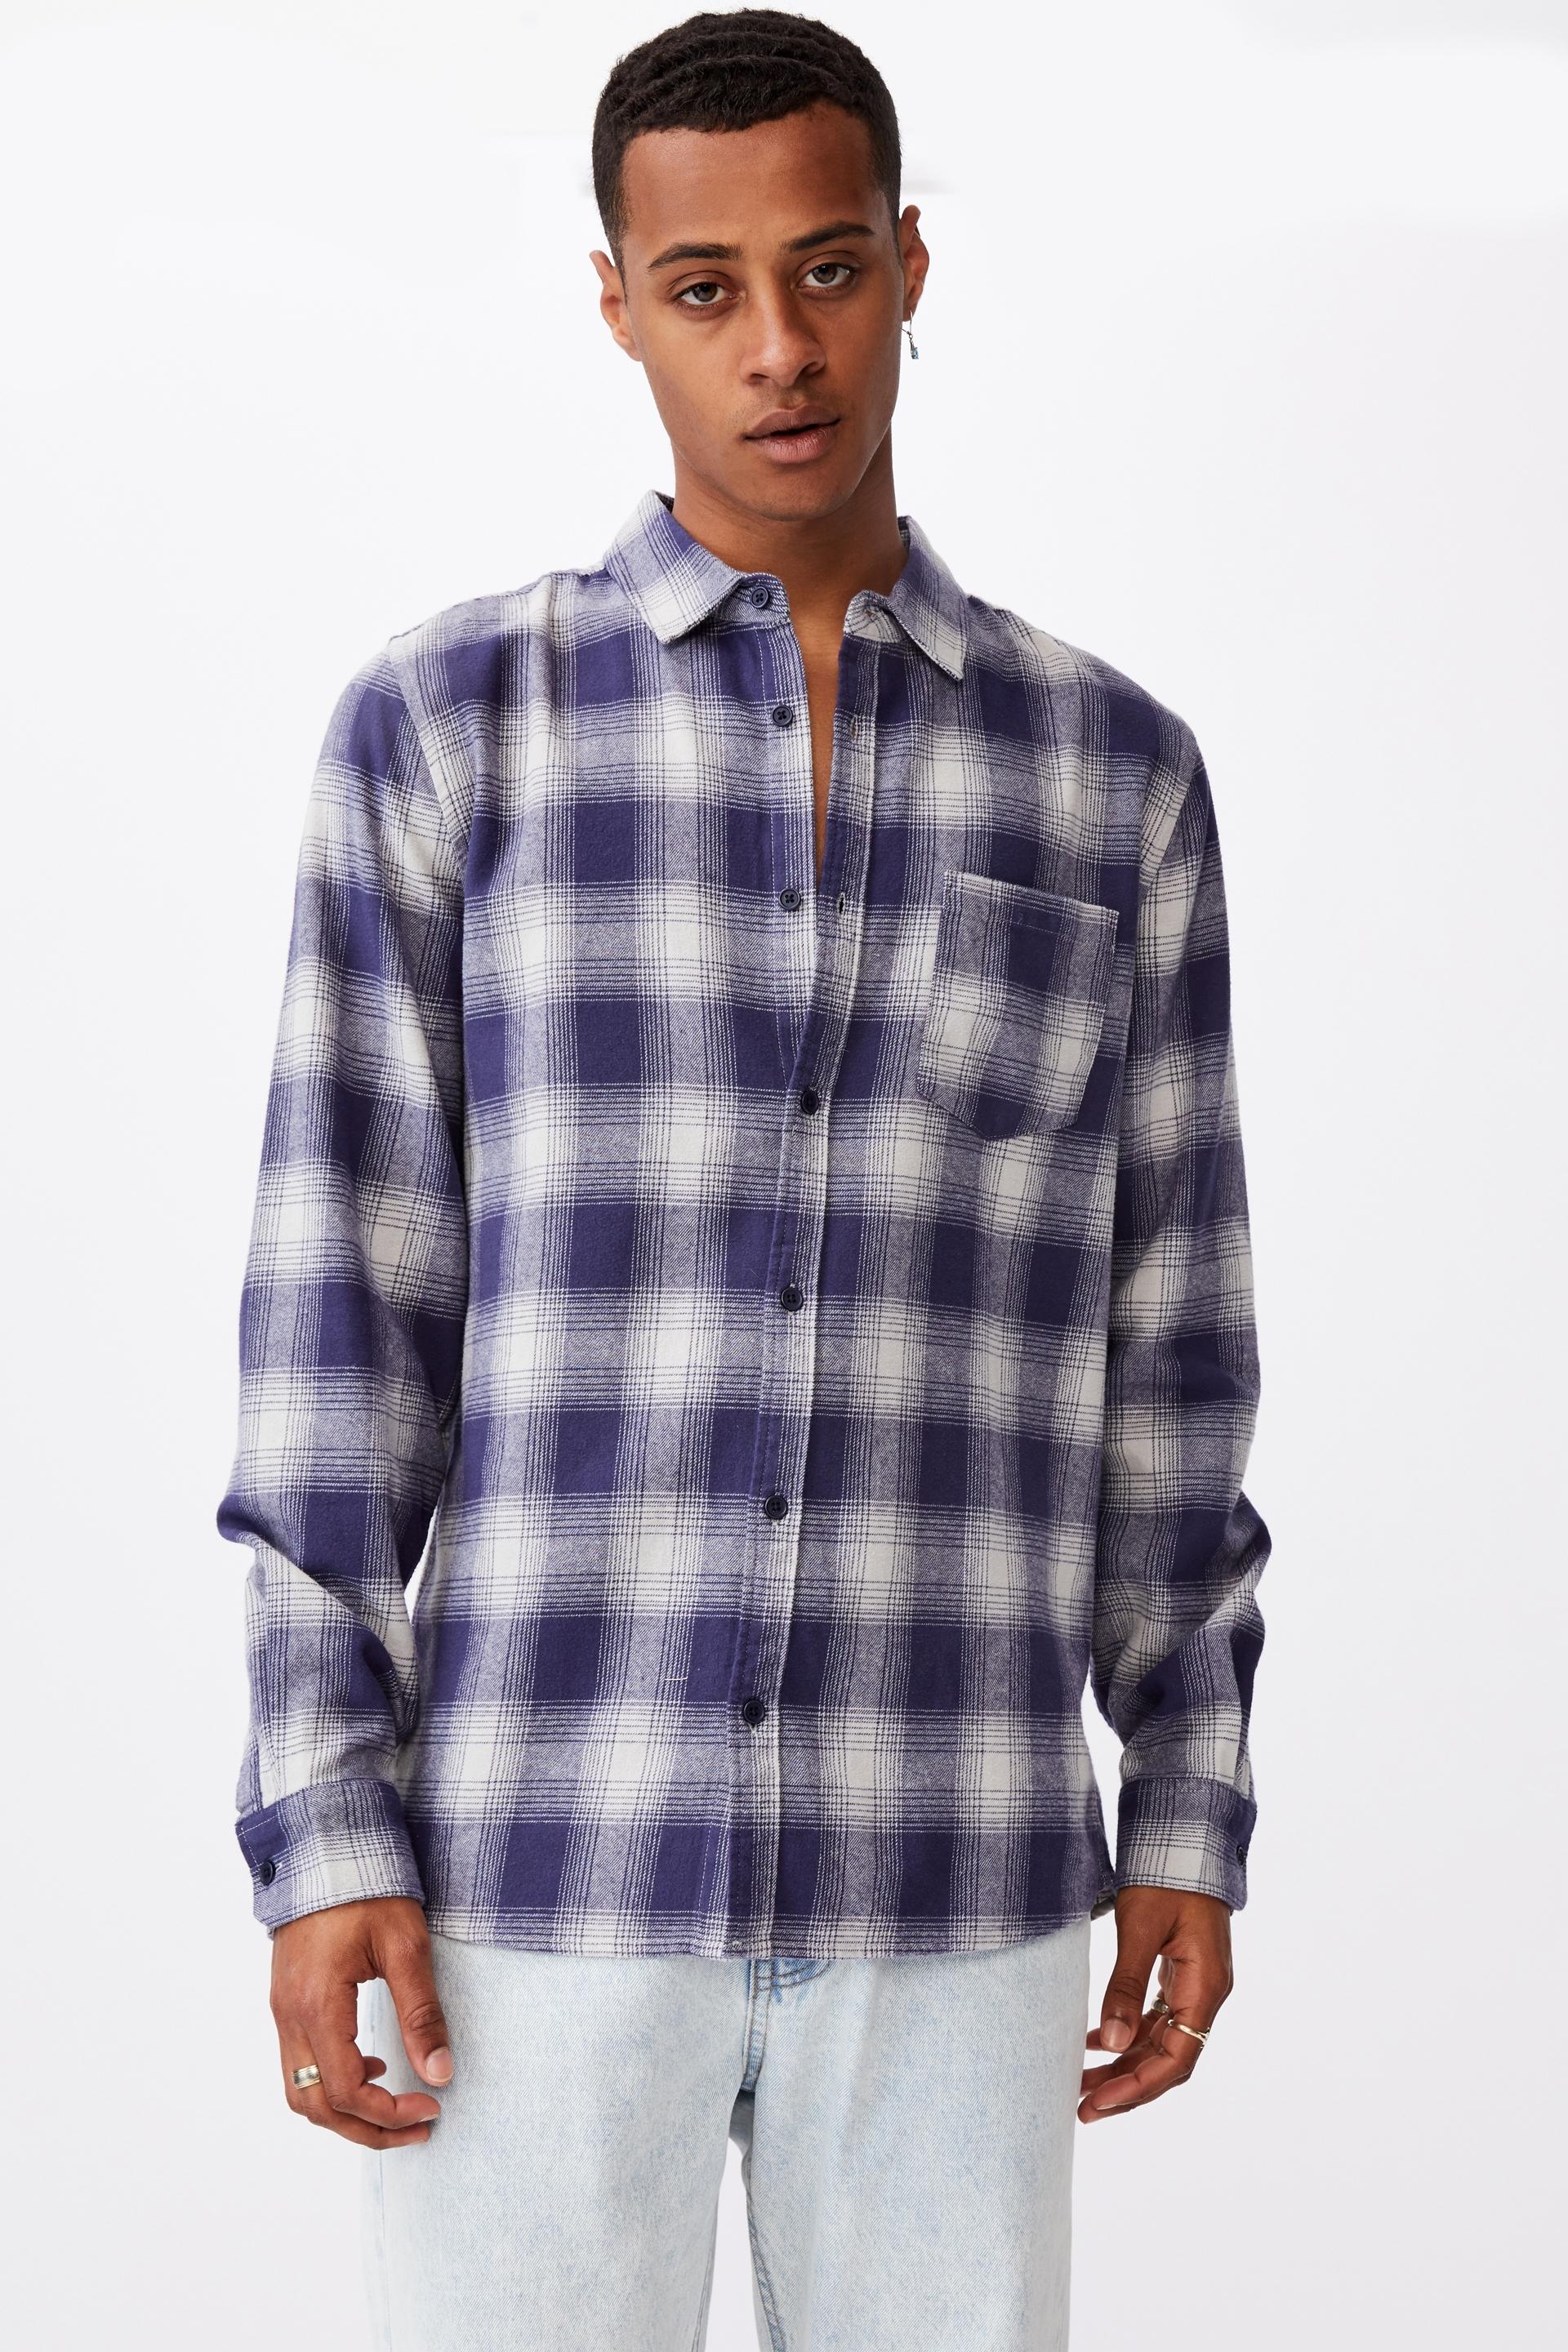 SC SUBCULTURE OMBRE CHECK SHIRT / BLUE メンズ | www.msagr.com.br